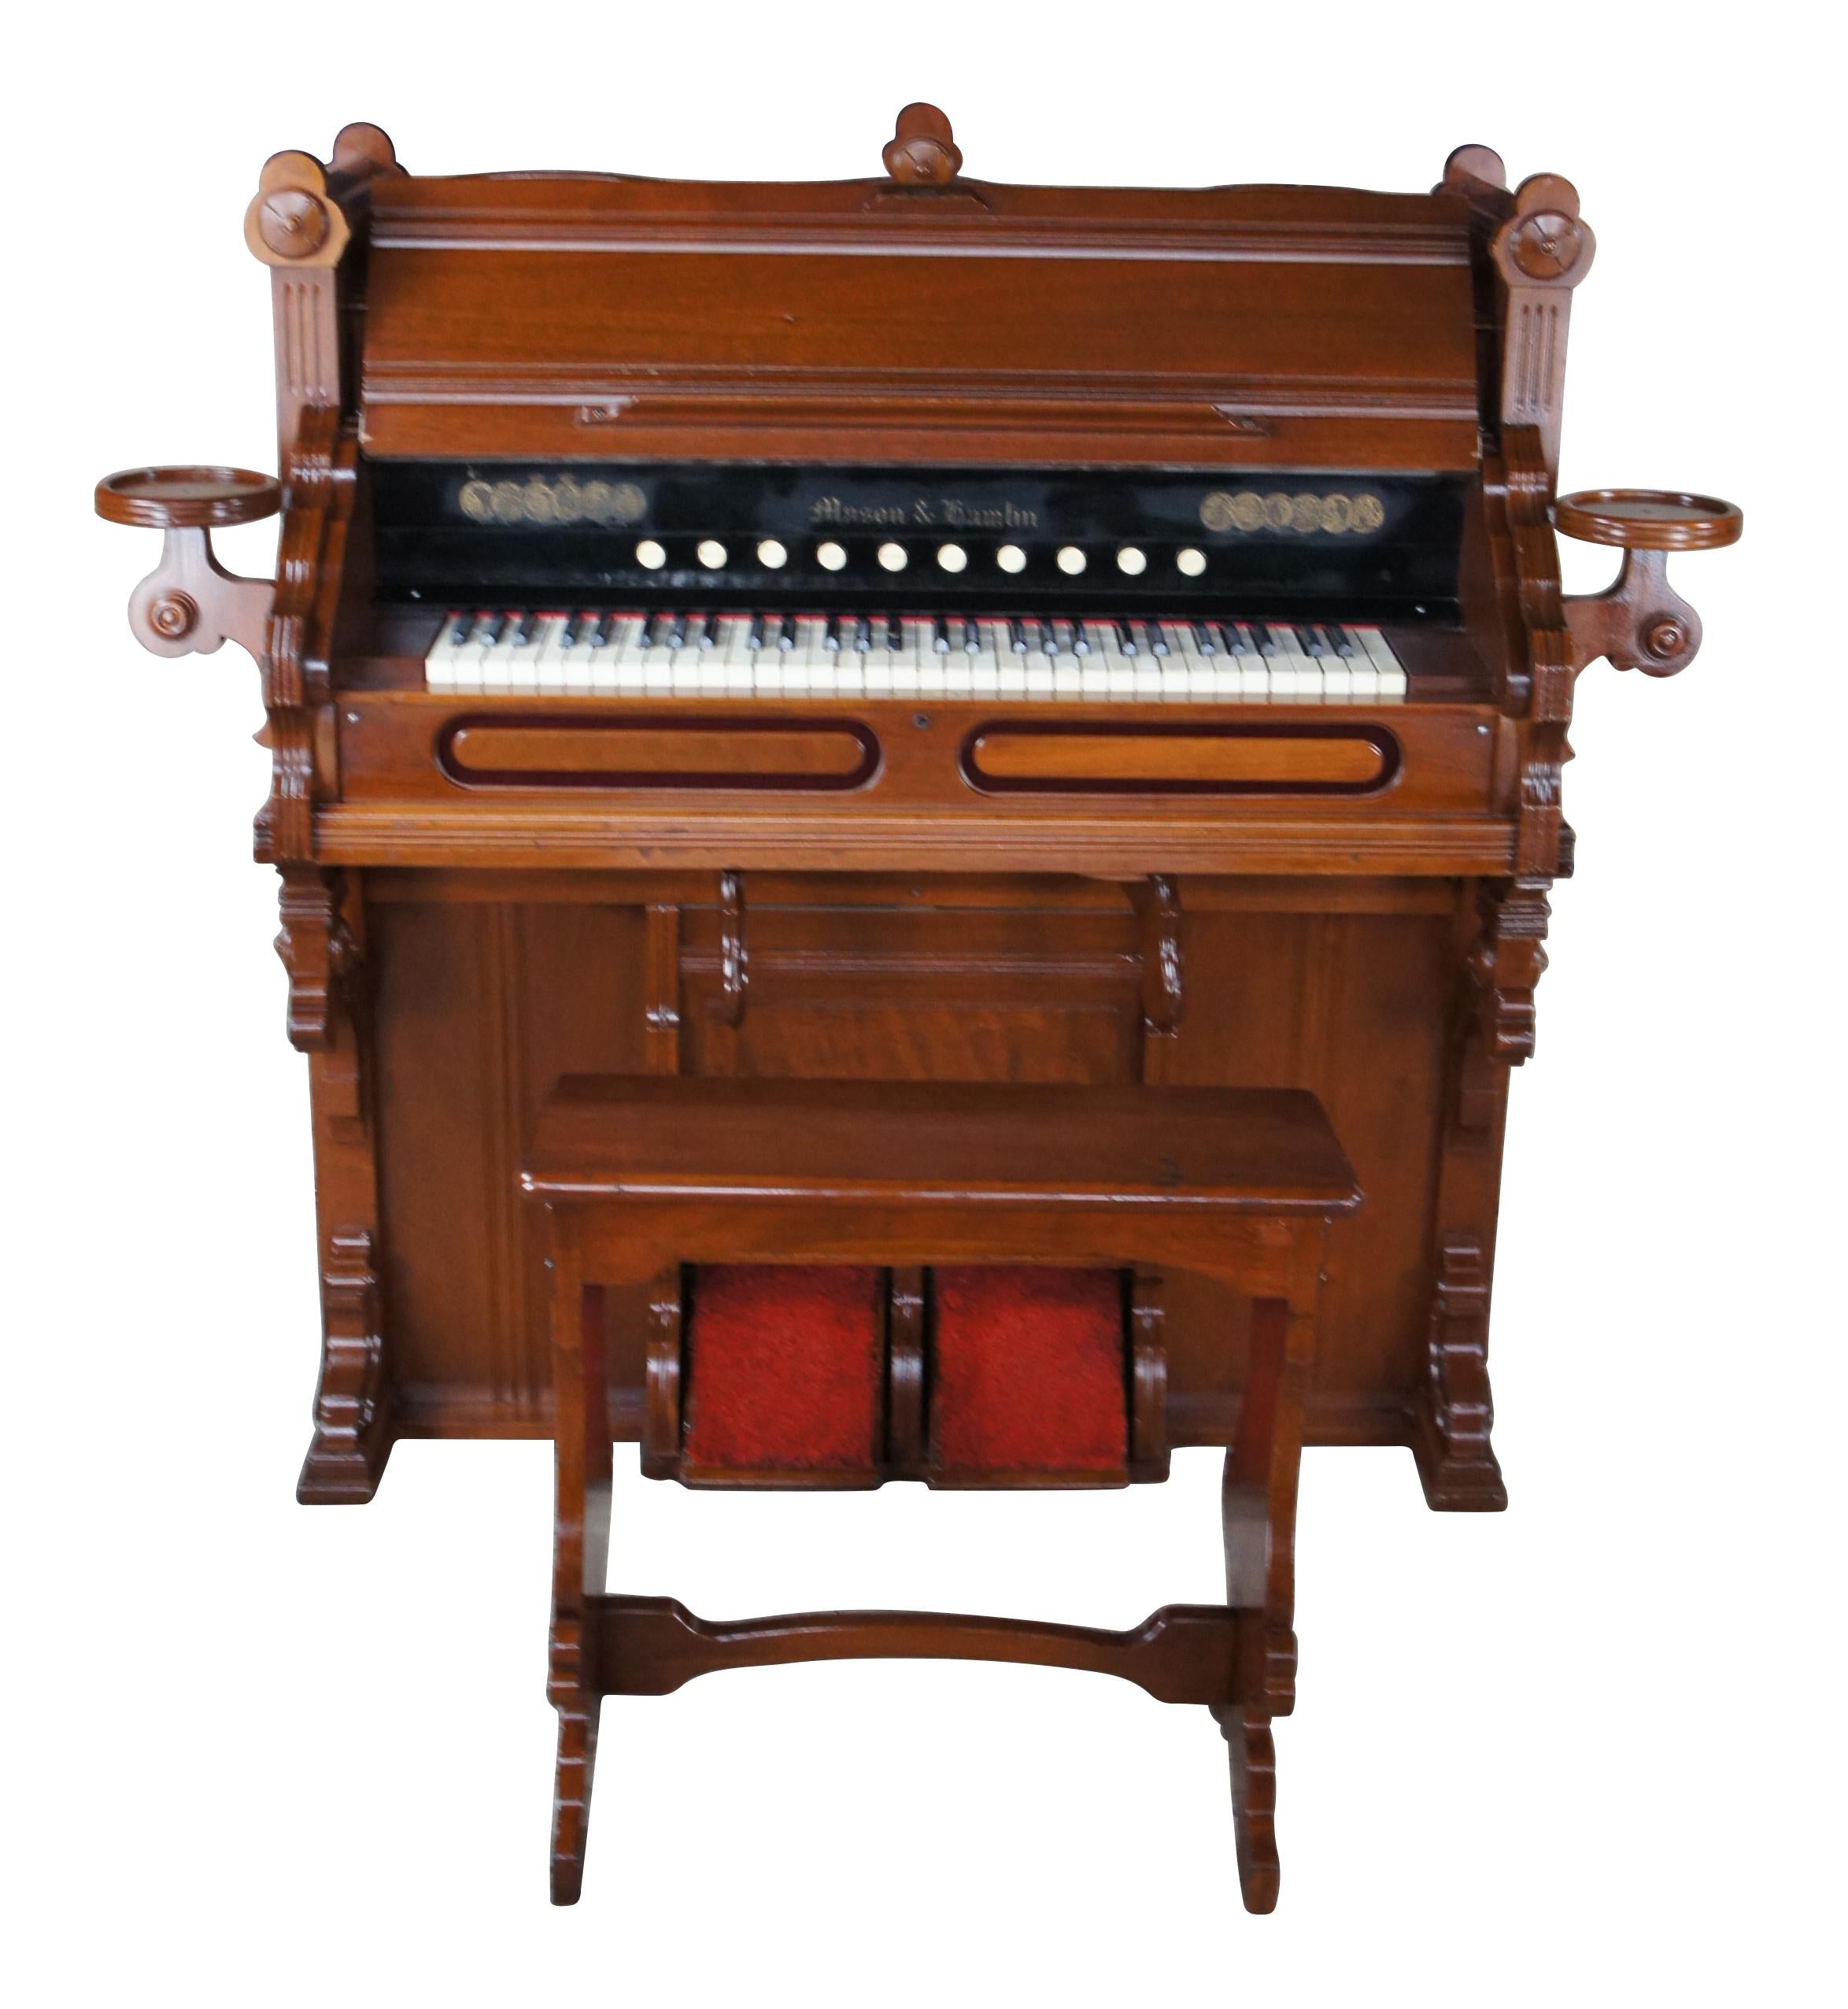 This reed organ was made by Mason & Hamlin in Boston, Massachusetts, cirfca 1890s. It is a parlor / Chapel model with a with a single keyboard, two knee swells, and two pedals.  Made from walnut with burled and carved accents.  Neatly flanked by